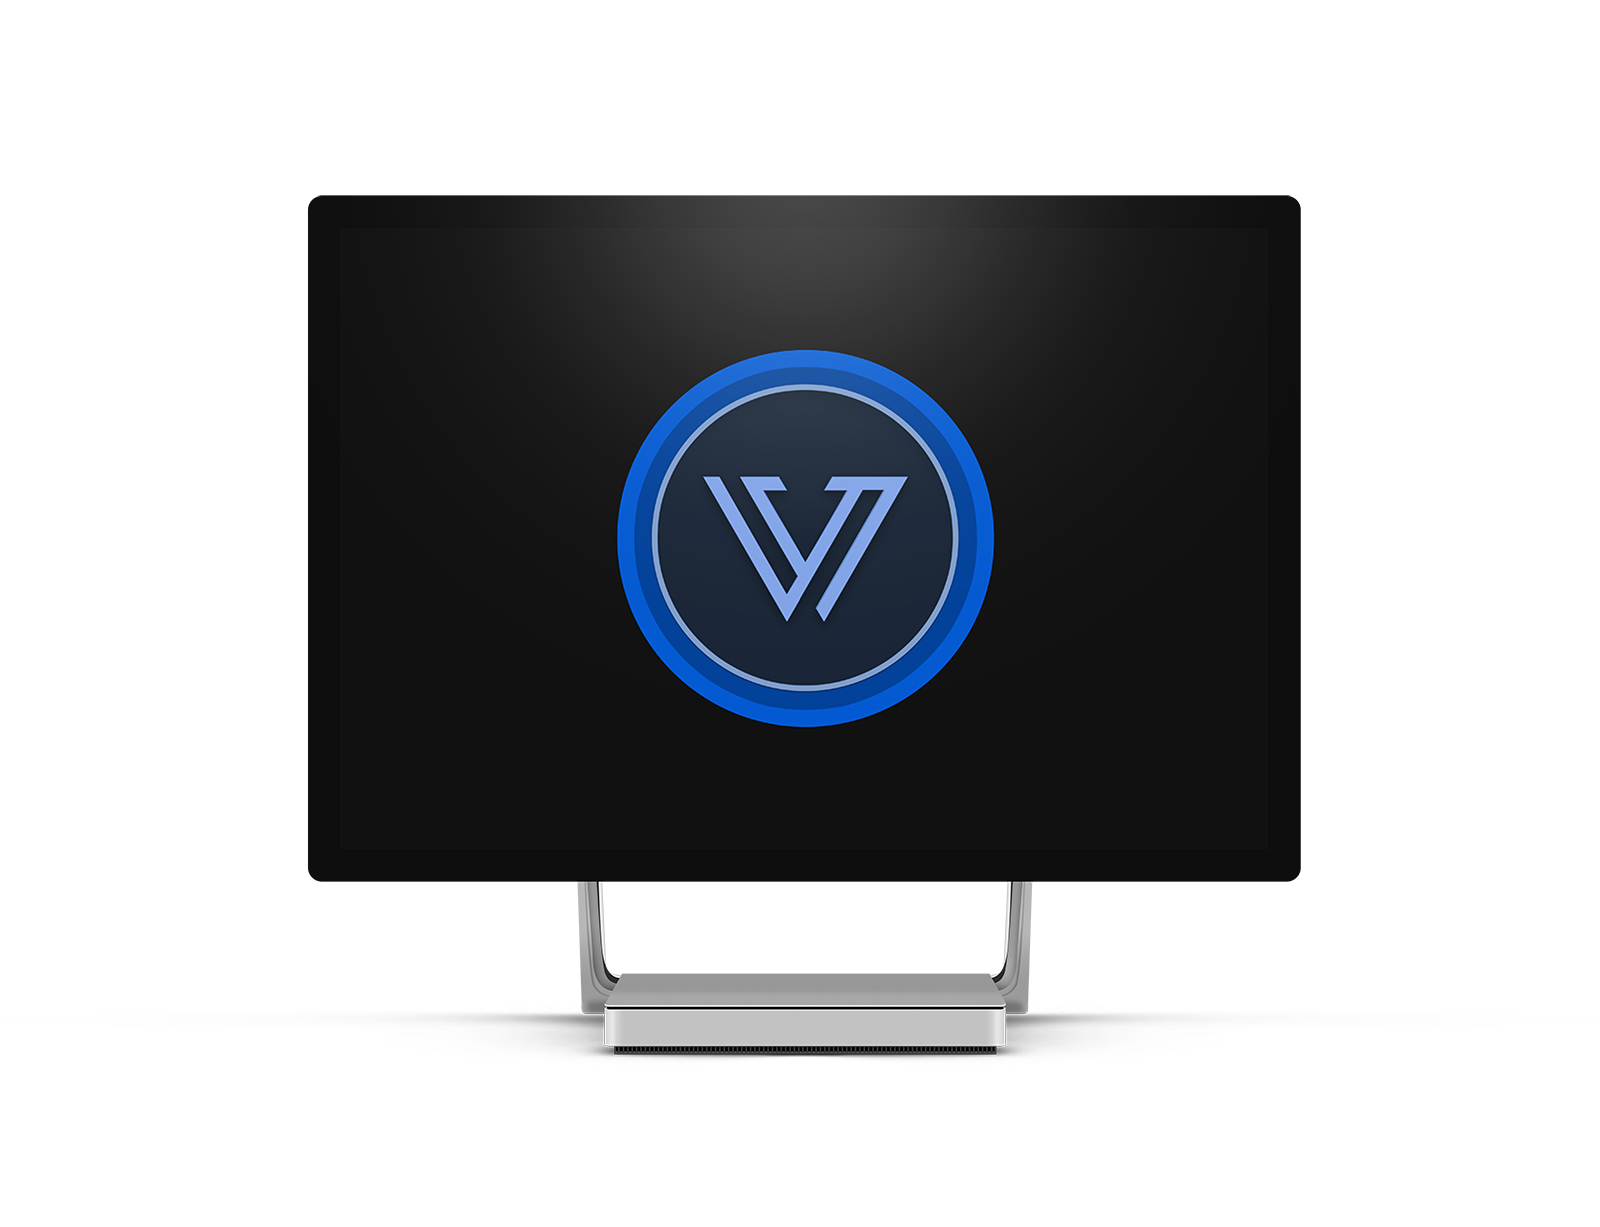 Monitor with Vuild logo